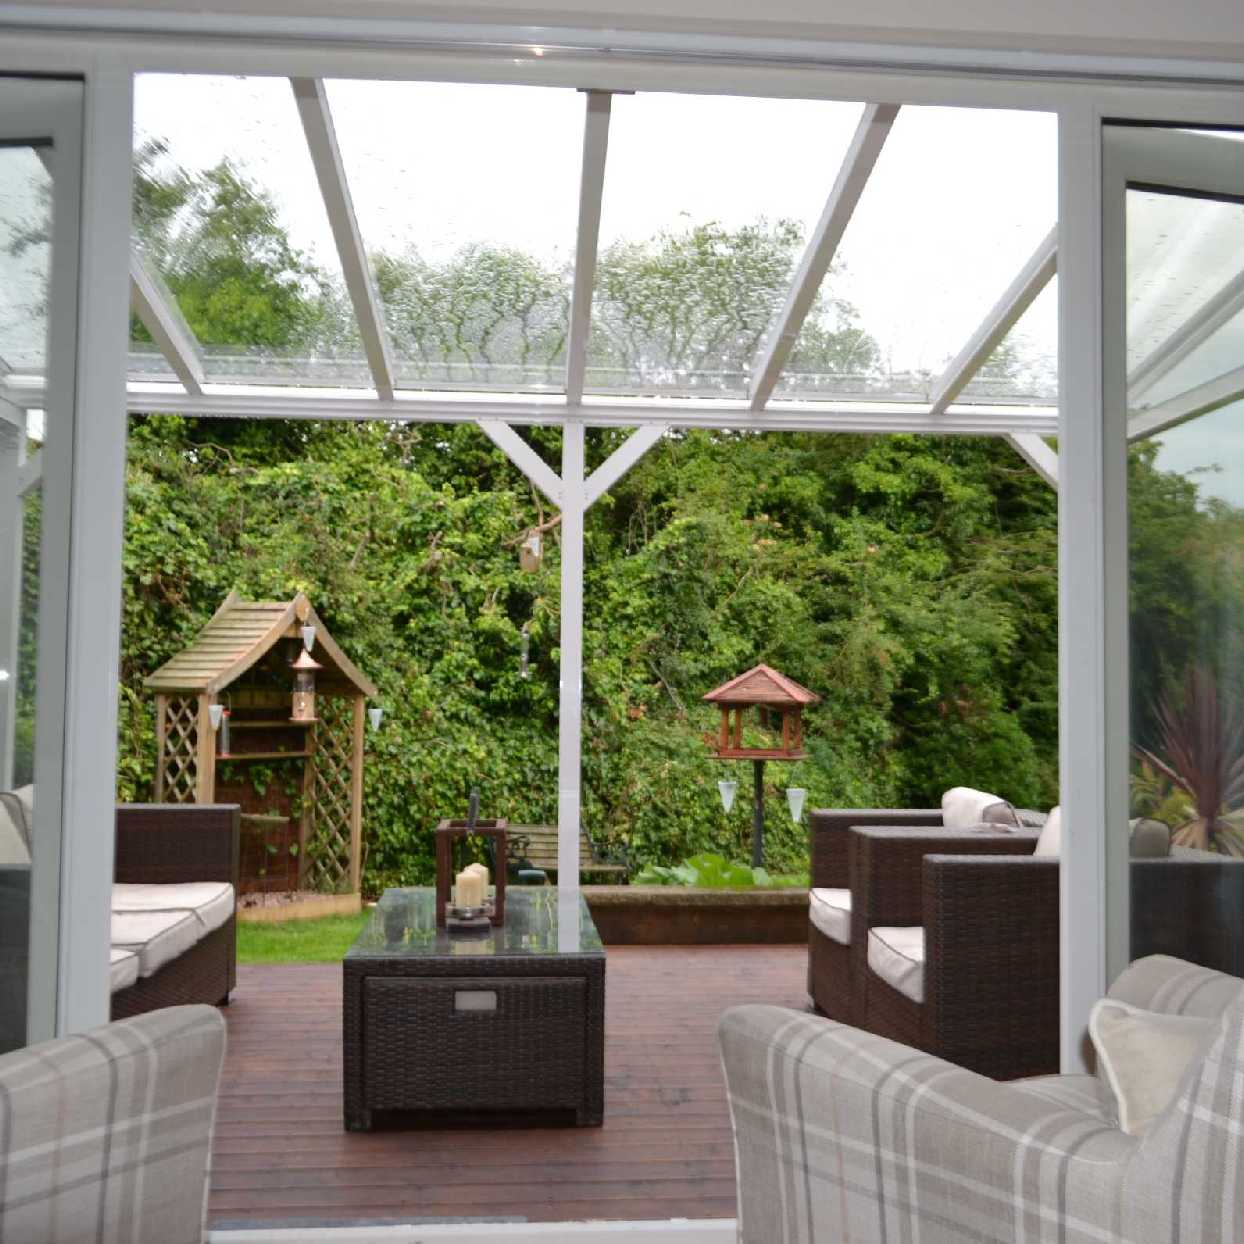 Great selection of Omega Smart Lean-To Canopy, White UNGLAZED for 6mm Glazing - 3.5m (W) x 2.0m (P), (3) Supporting Posts